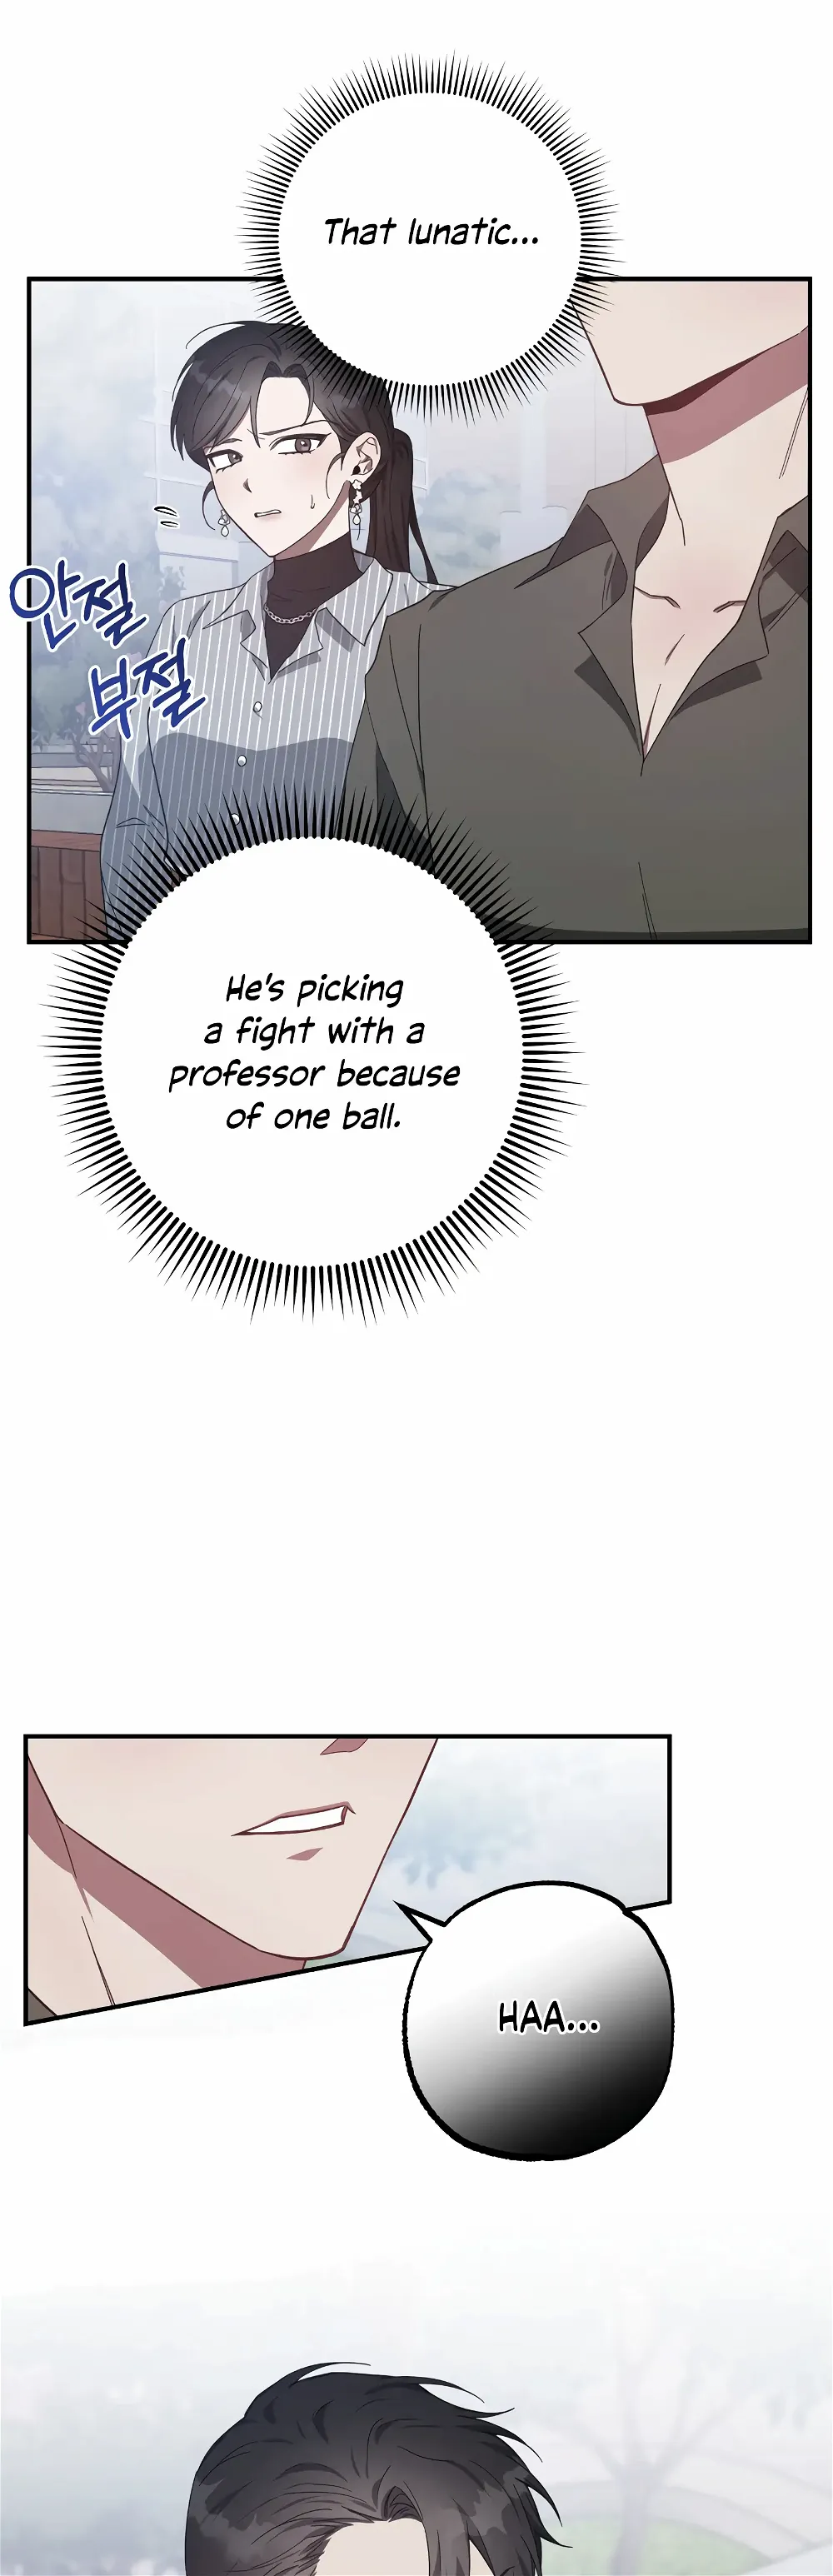 Mijeong’s Relationships chapter 17 - Page 5